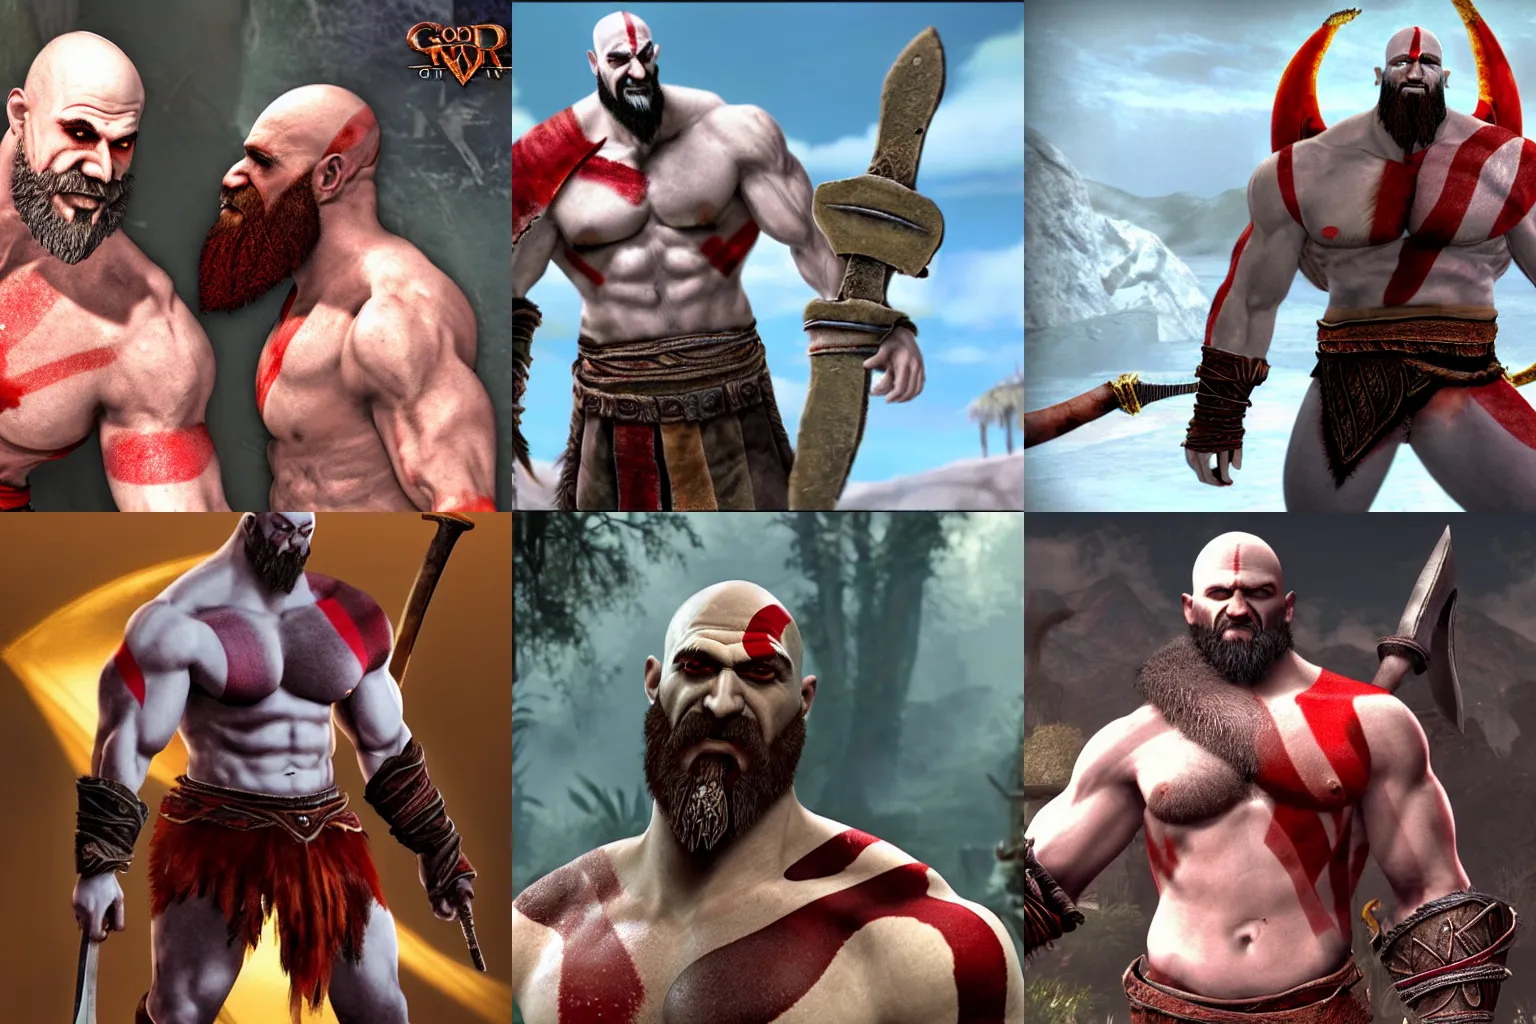 Prompt: Skinny and wimpy Kratos from God of War